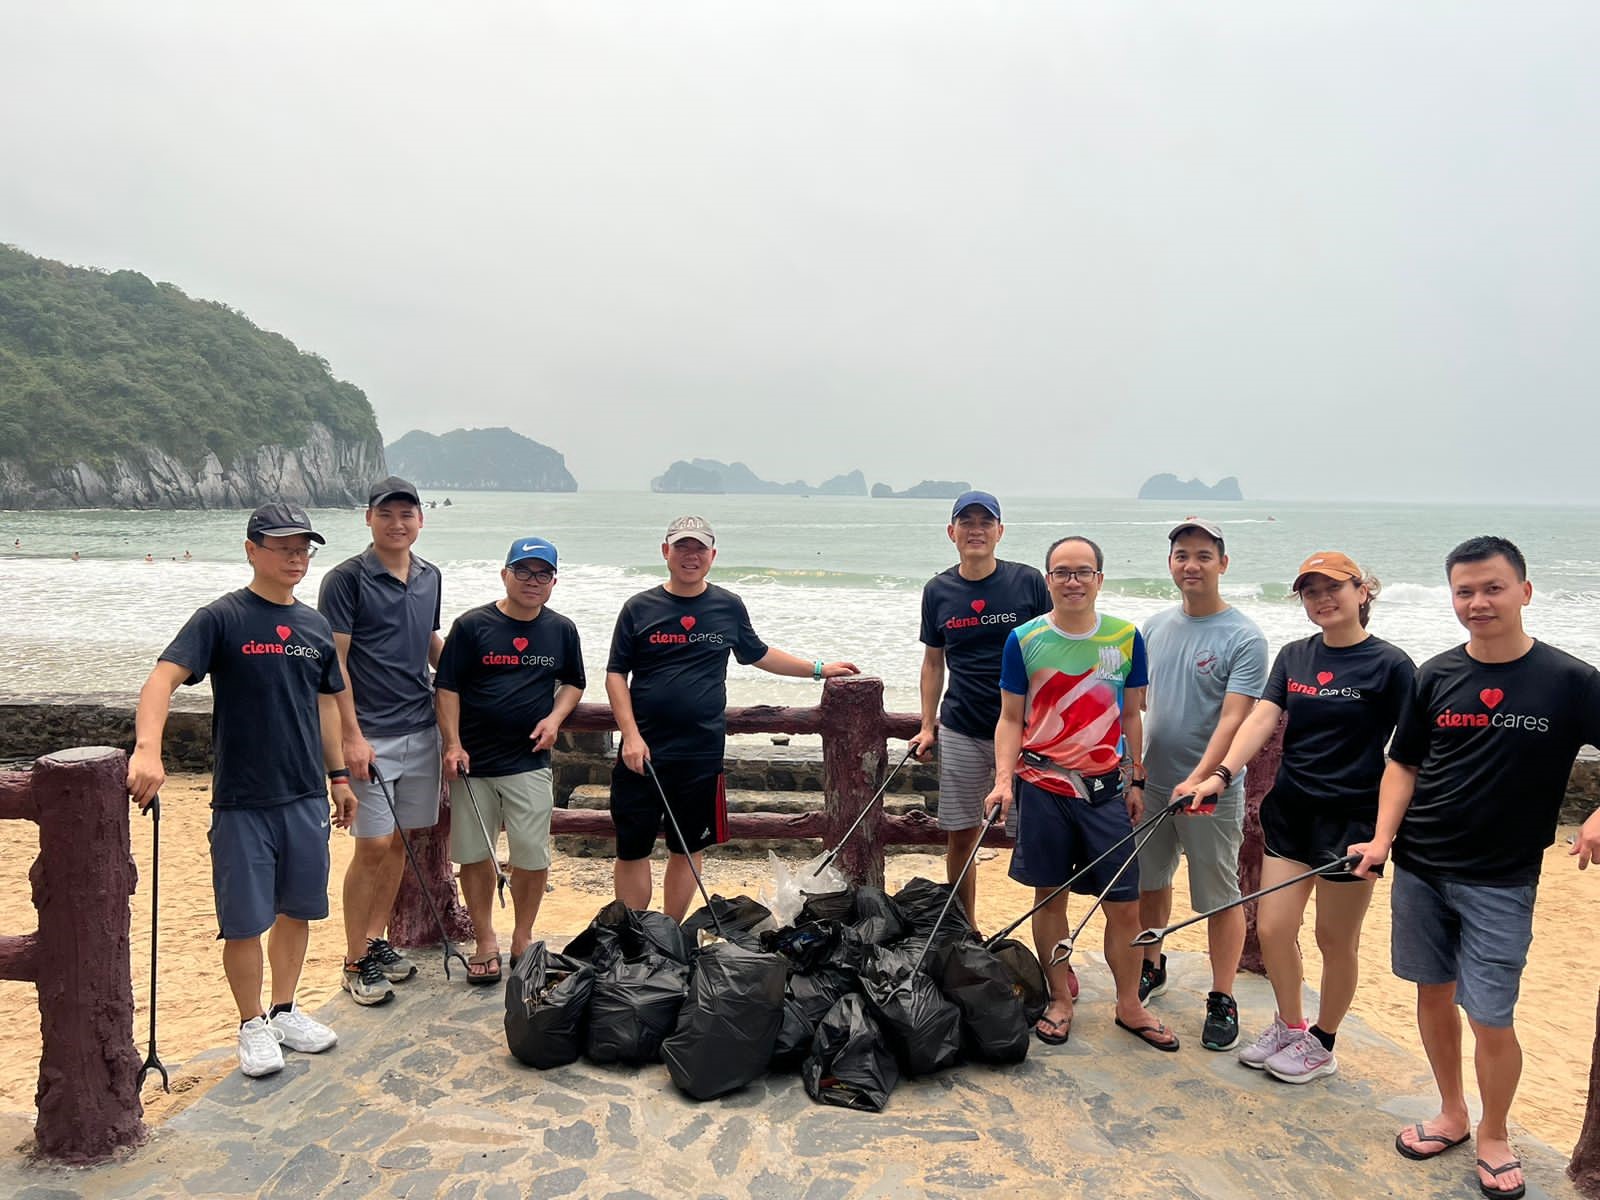 Men and women on a beach with full trash bags 